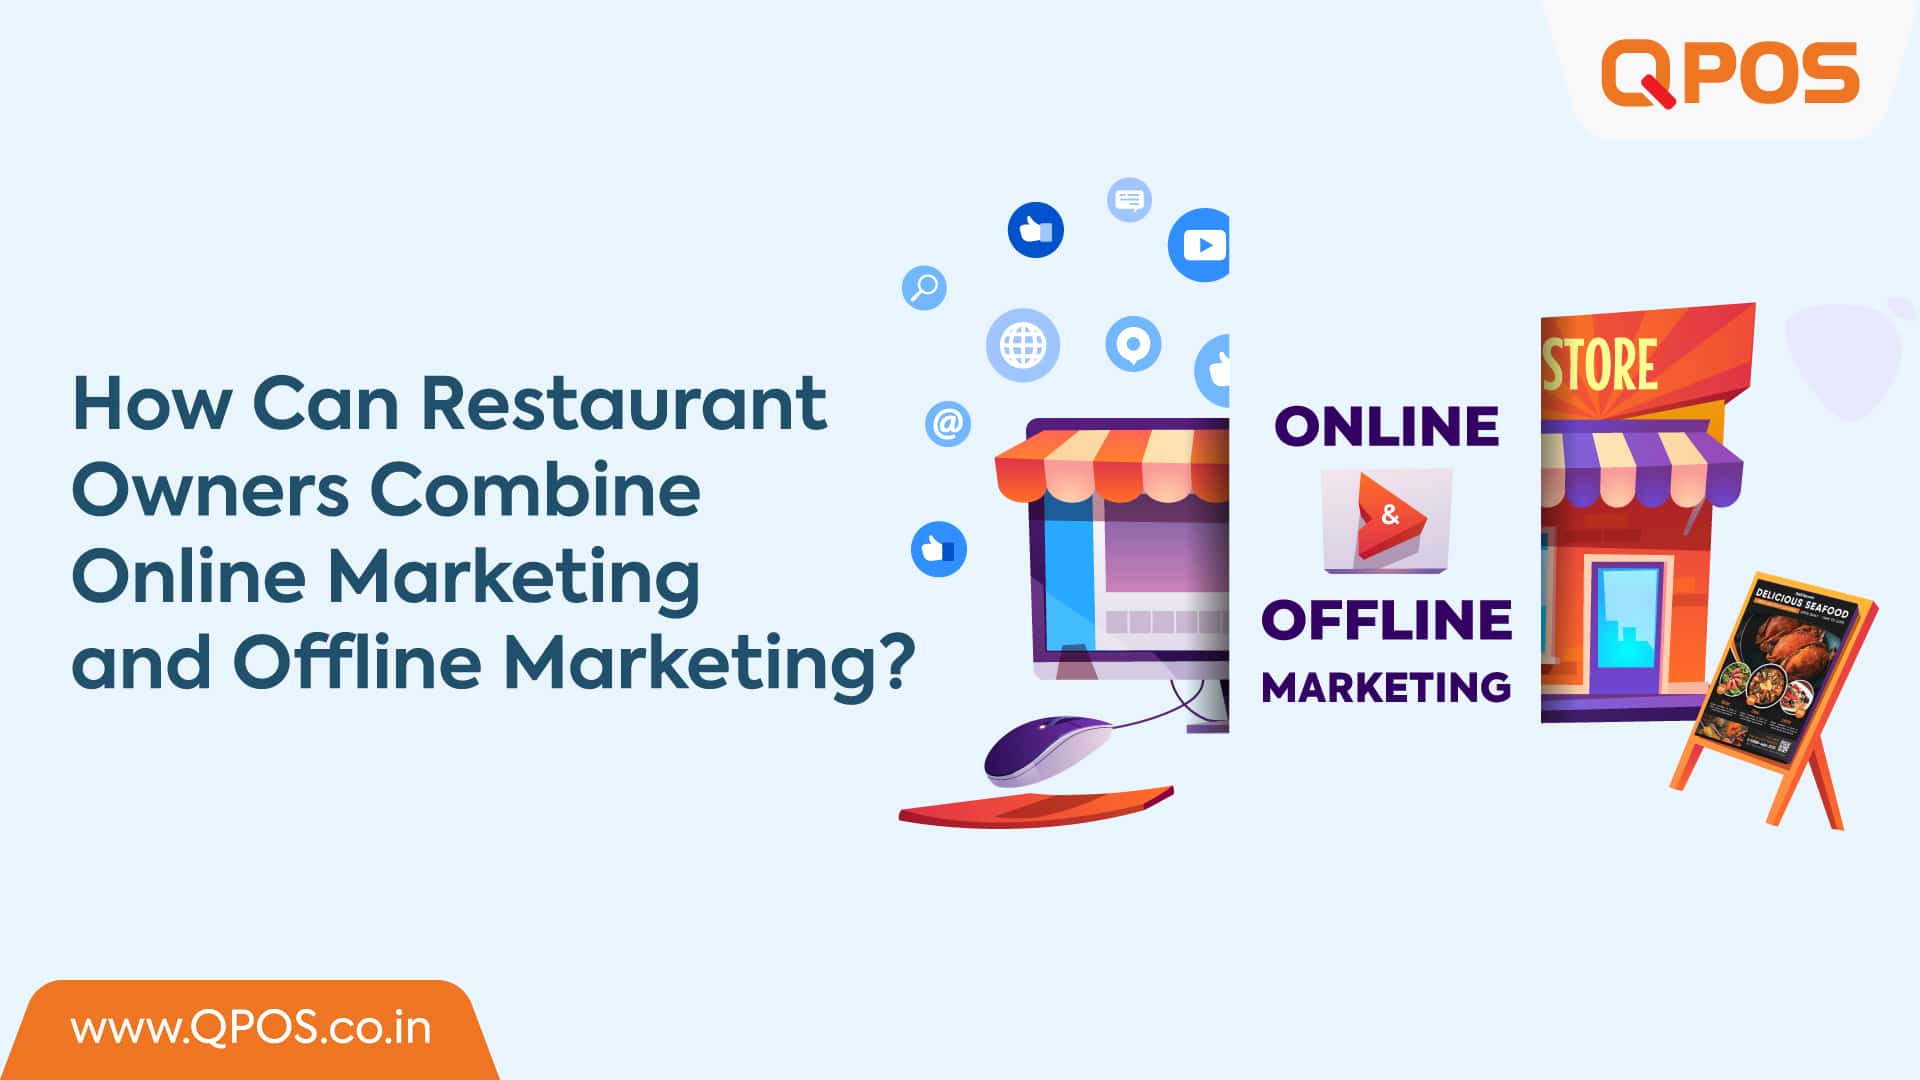 How Can Restaurant Owners Combine Online Marketing and Offline Marketing?